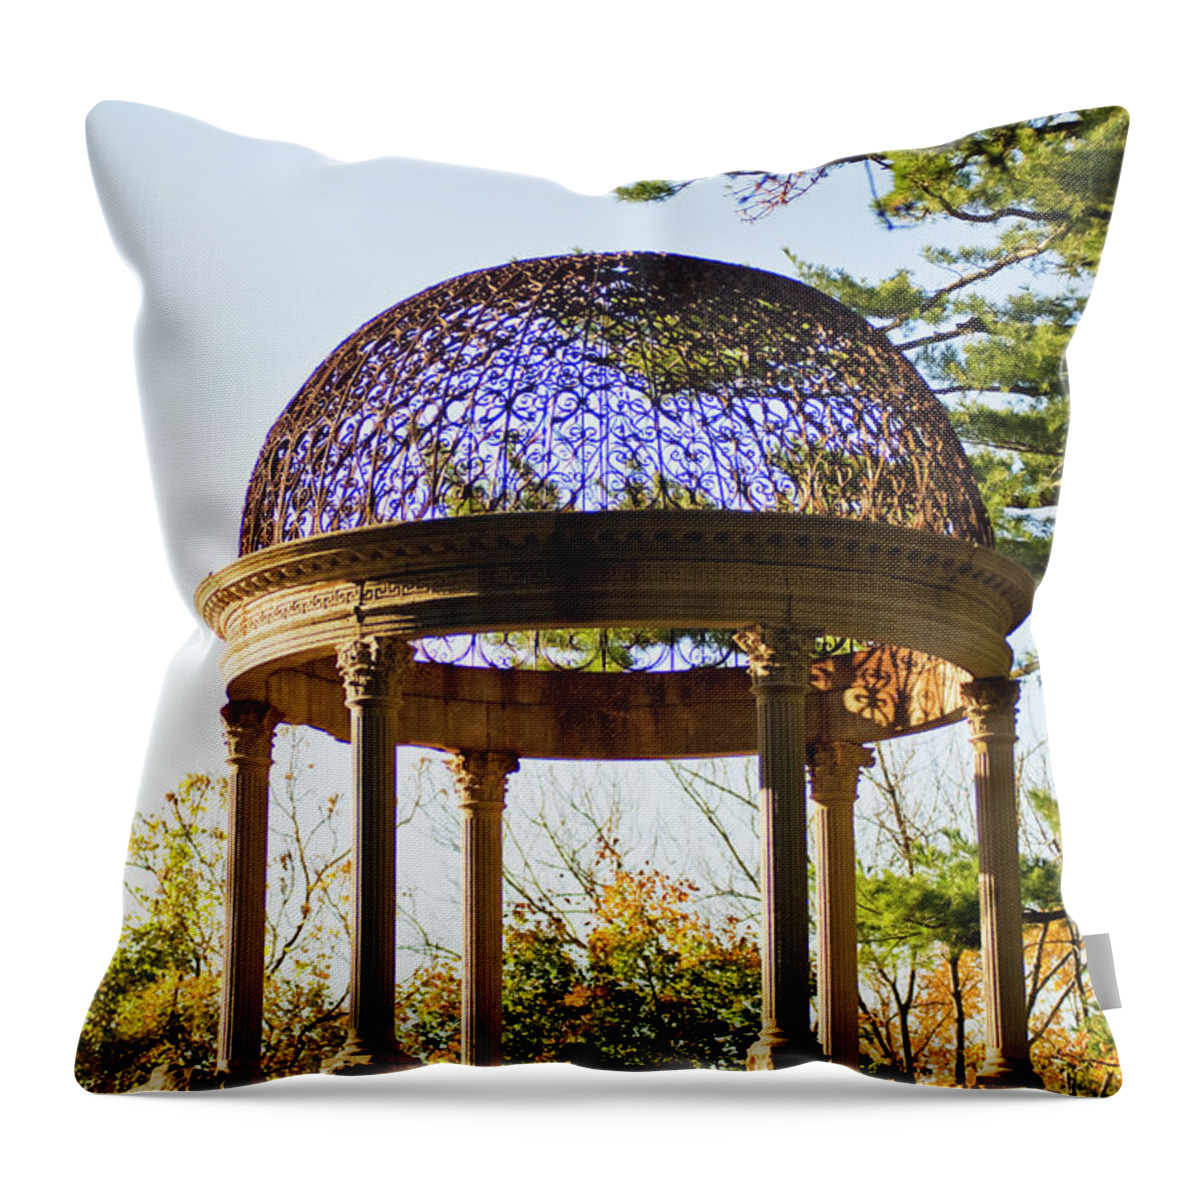 Dome Throw Pillow featuring the photograph The Sunny Dome by Jose Rojas